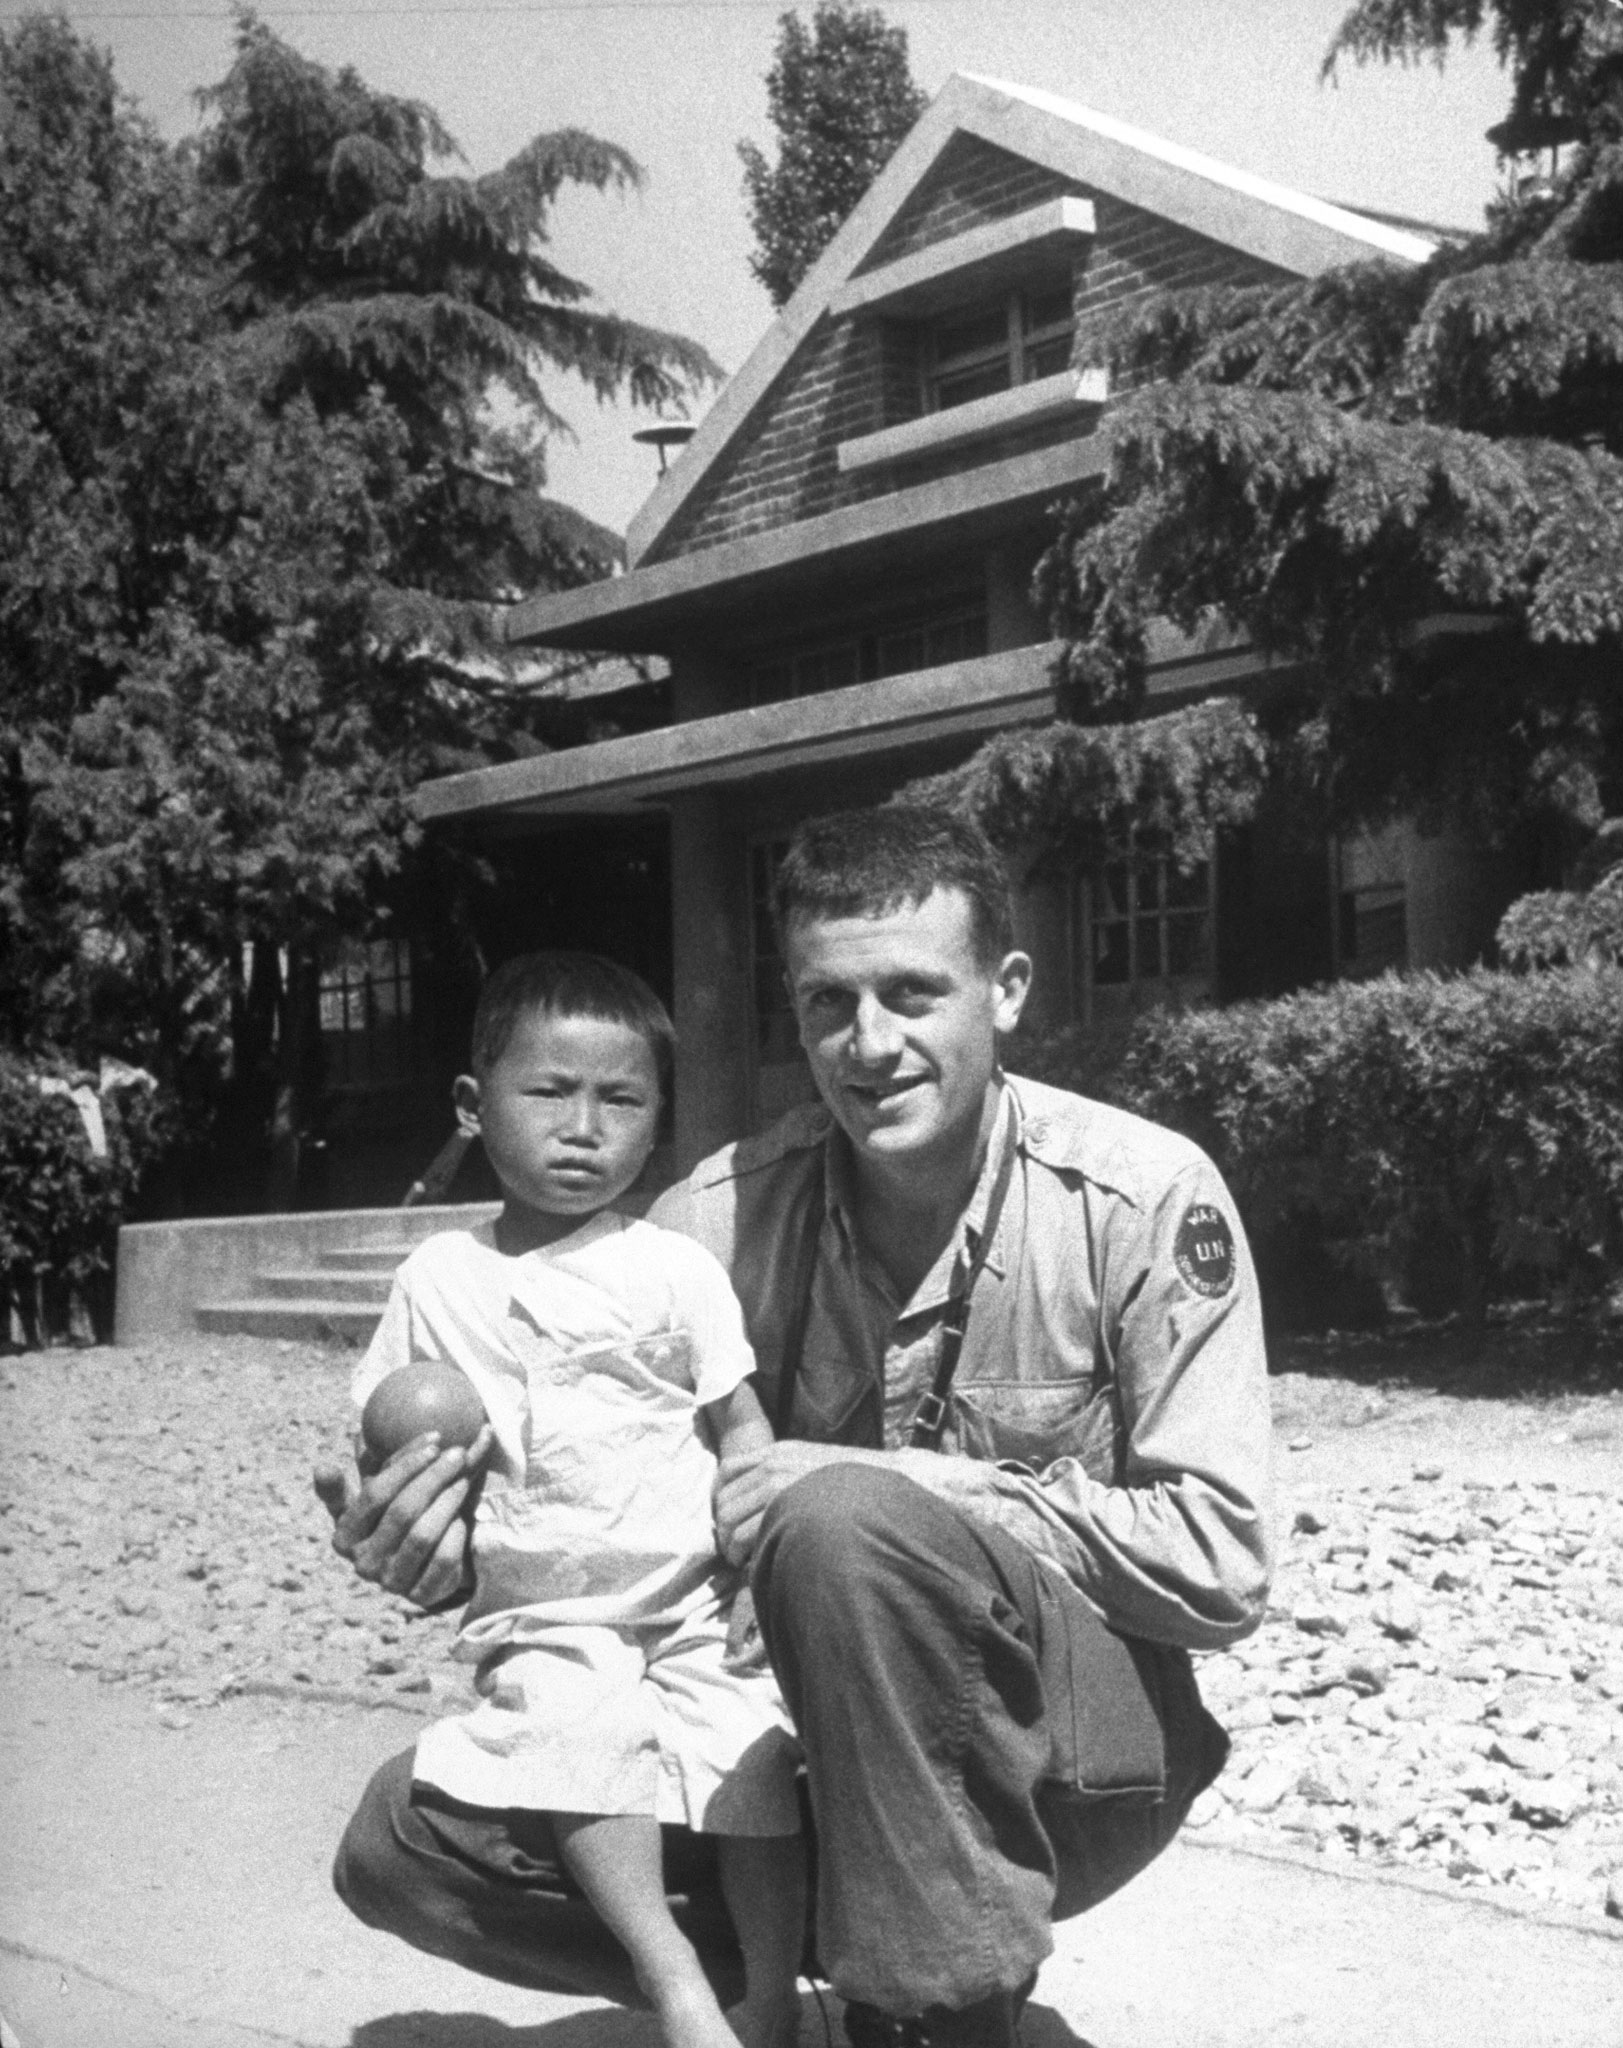 LIFE photographer Michael Rougier, kneeling on ground with a Korean orphan.